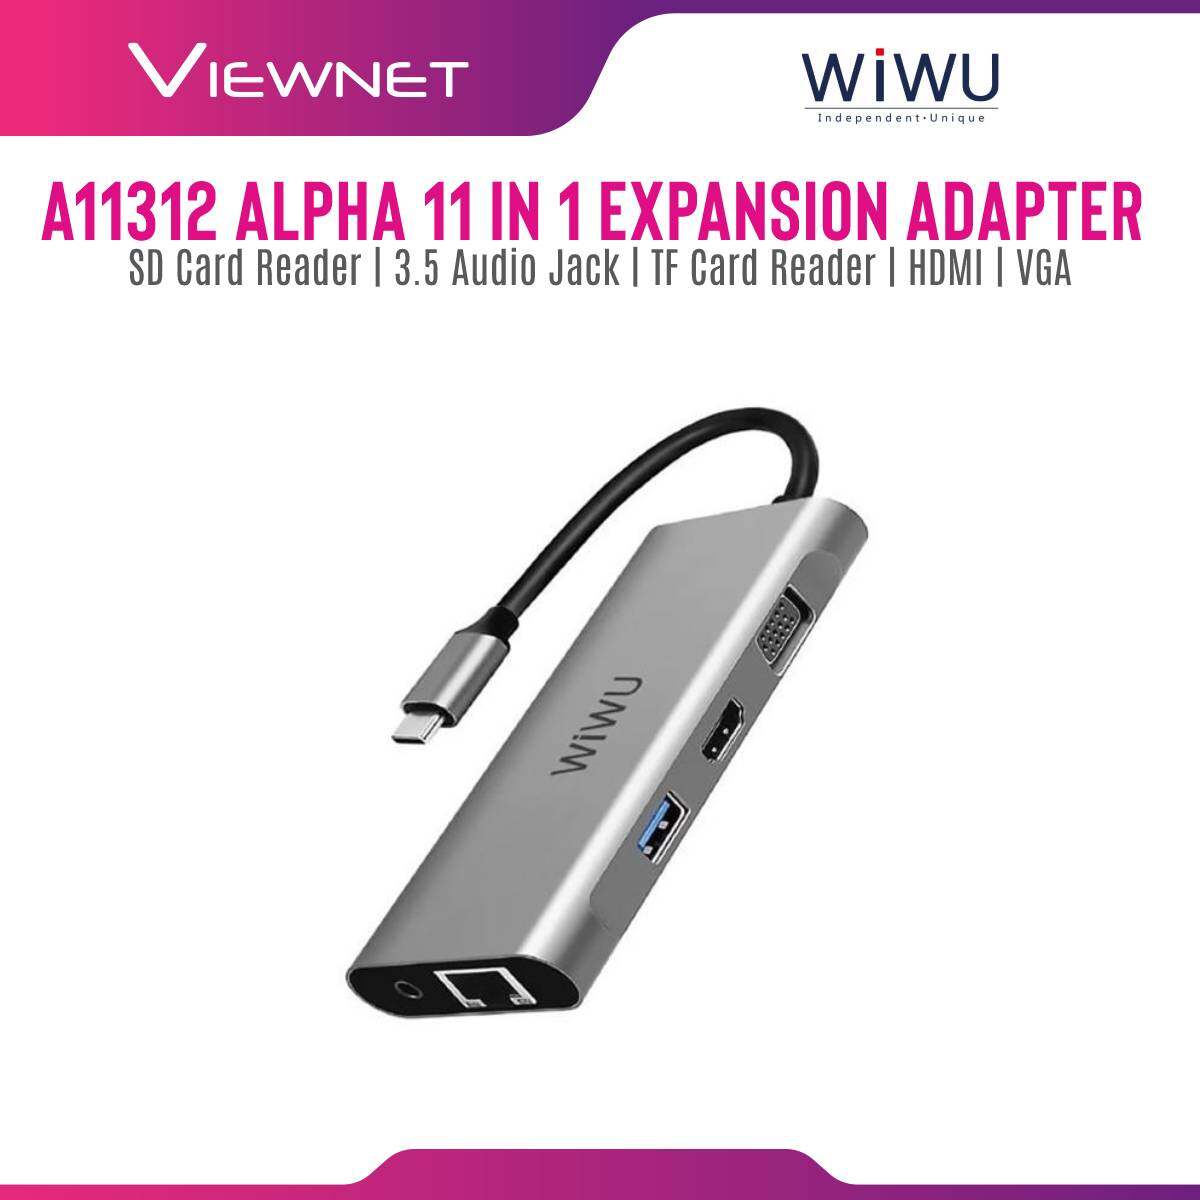 WIWU Alpha A11312h Type-c 11 In 1 Adapter Display TYPE-C TO 2-HDMI/VGA/3-USB3.0/LAN/AUDIO/SD CARD READER/PD